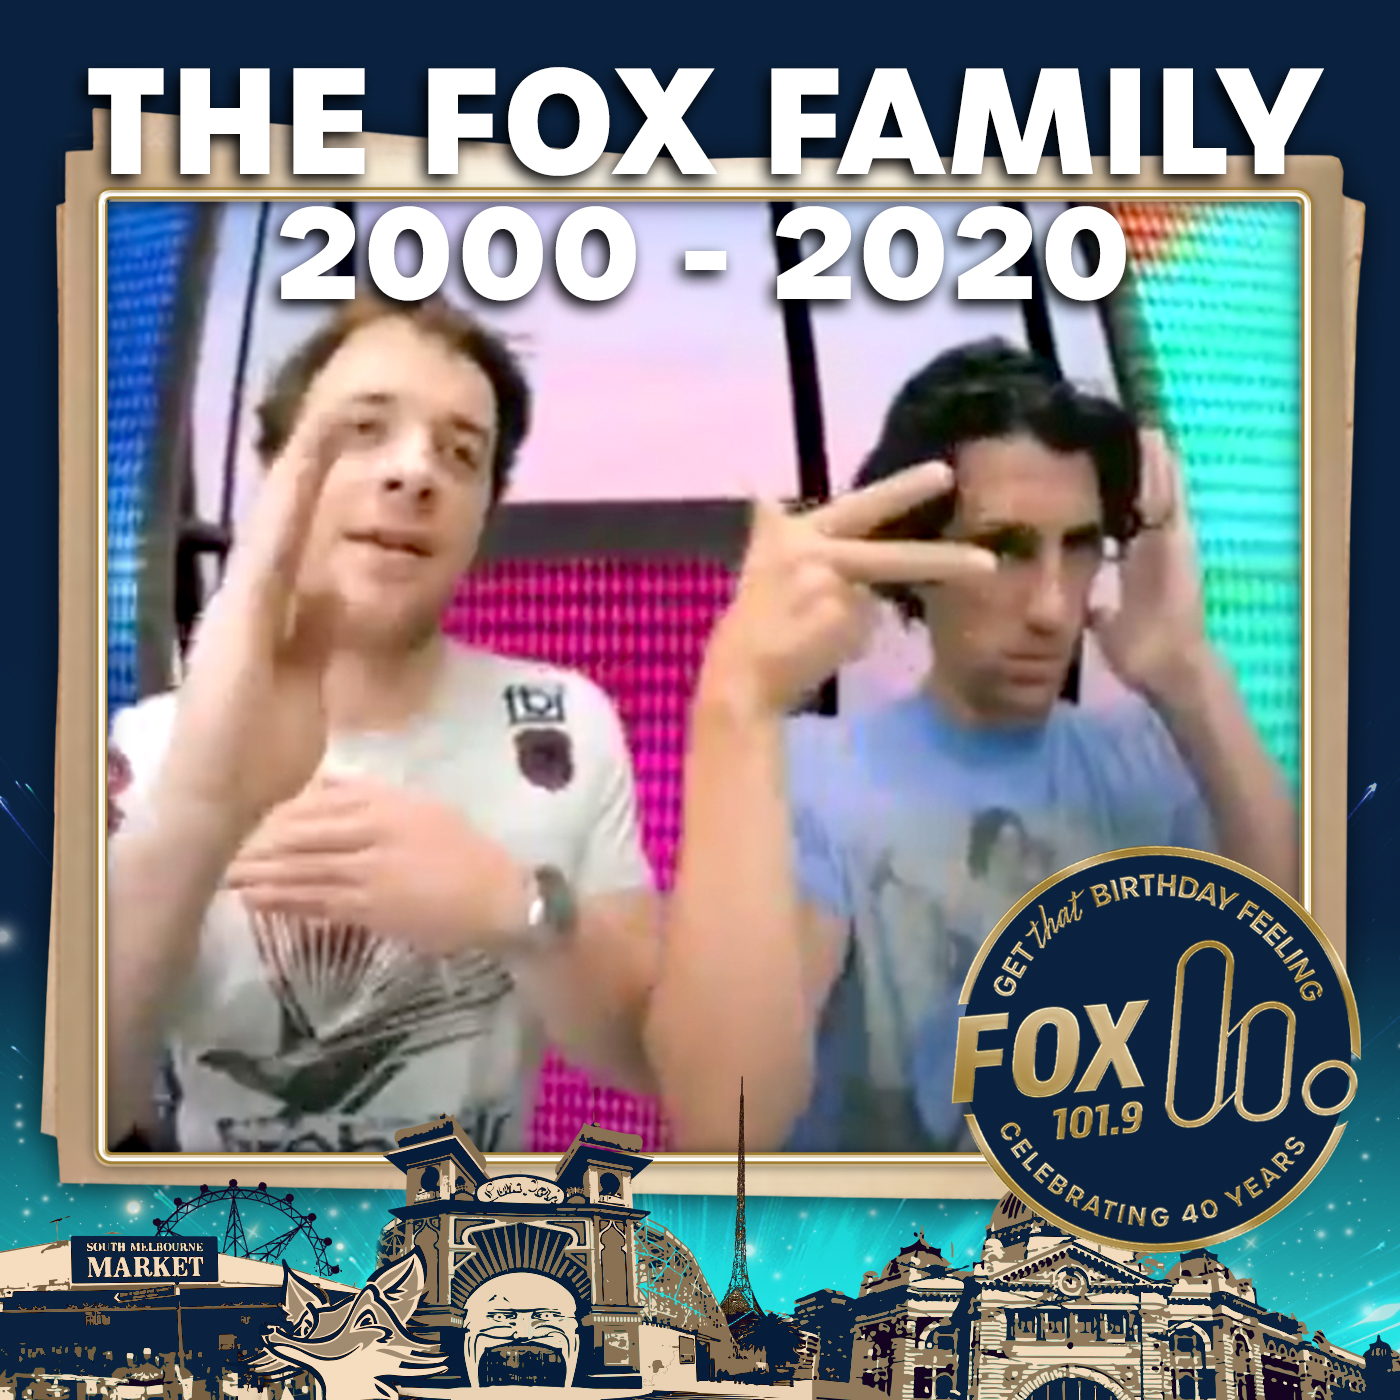 Fox Family | On Air Superstars From 2000 to 2020